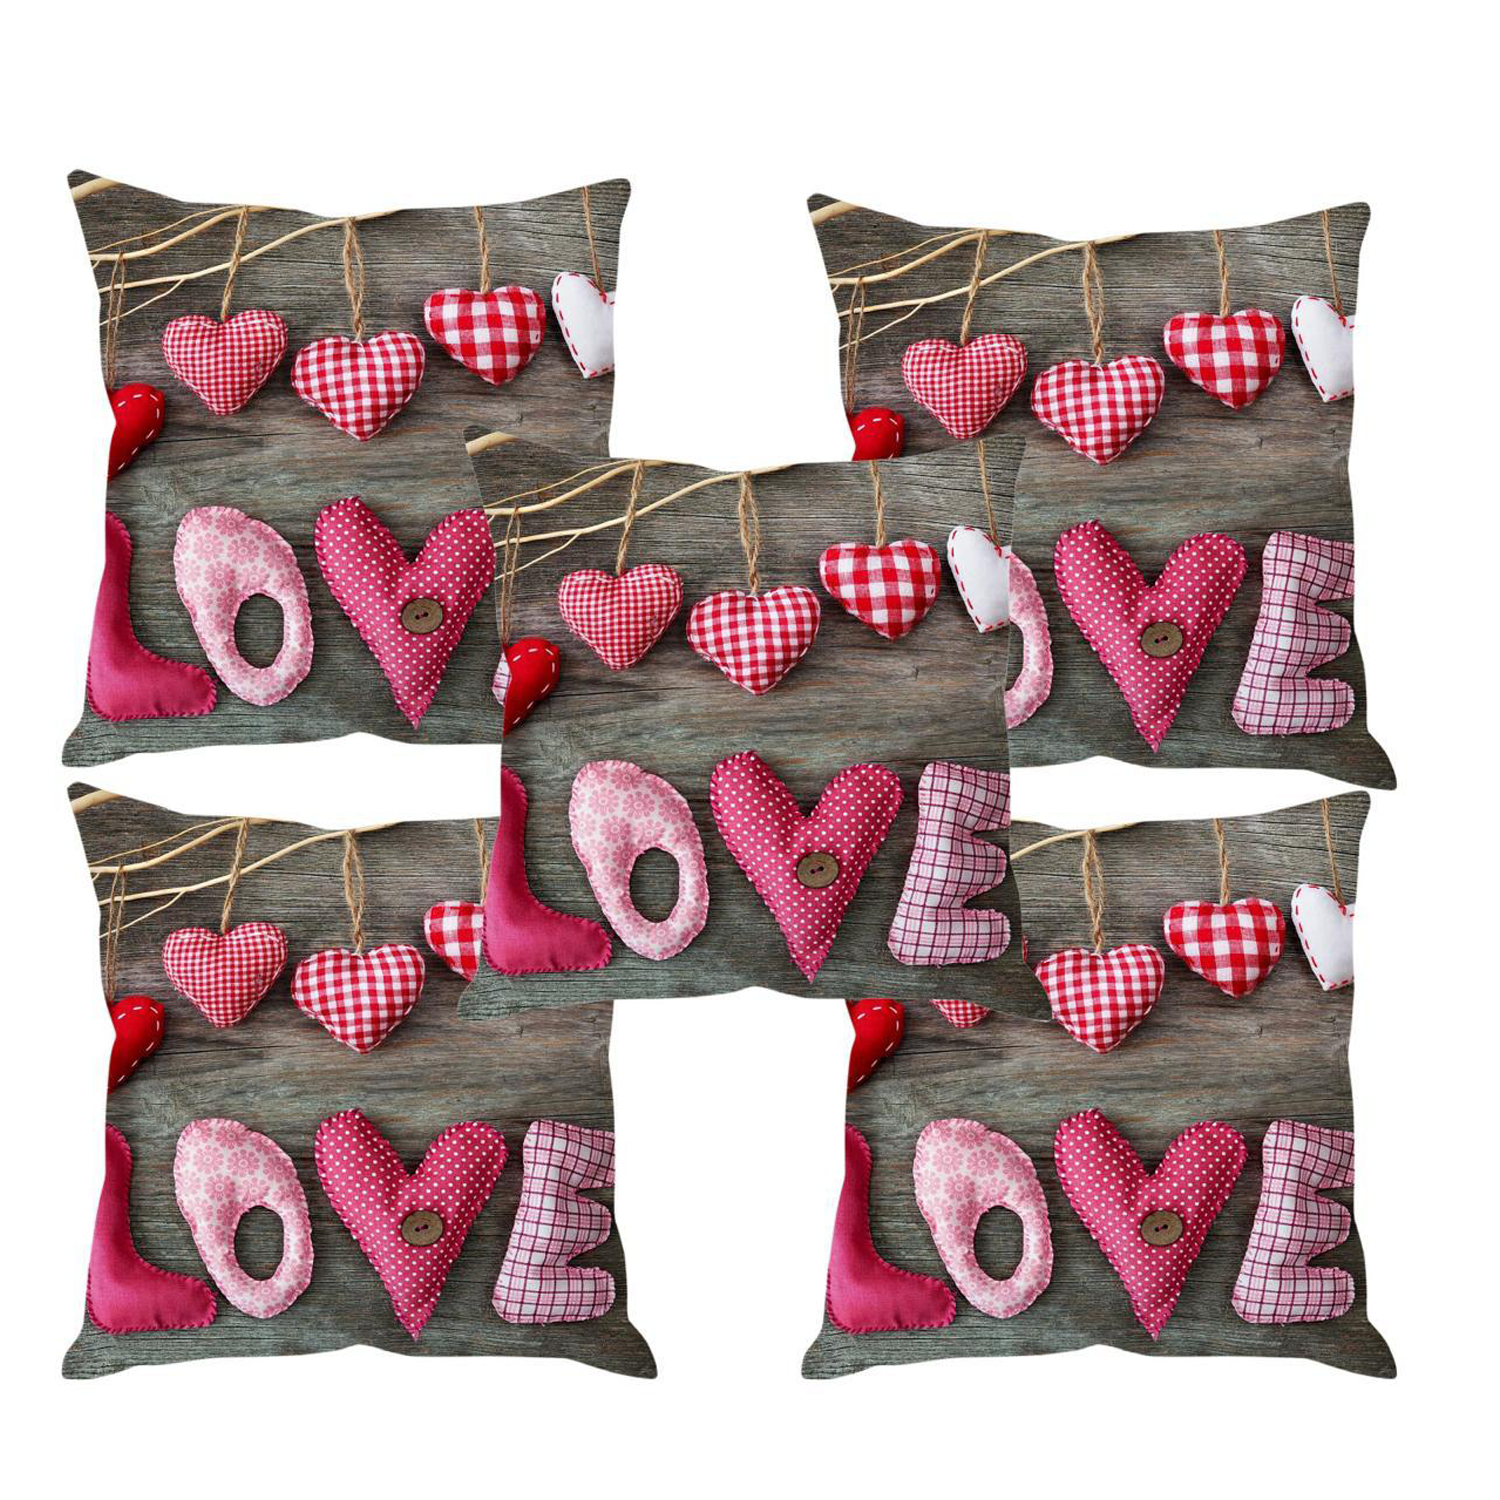 IndianOnlineMall set of 5 Jute Cushion Cover(16x16 inch)